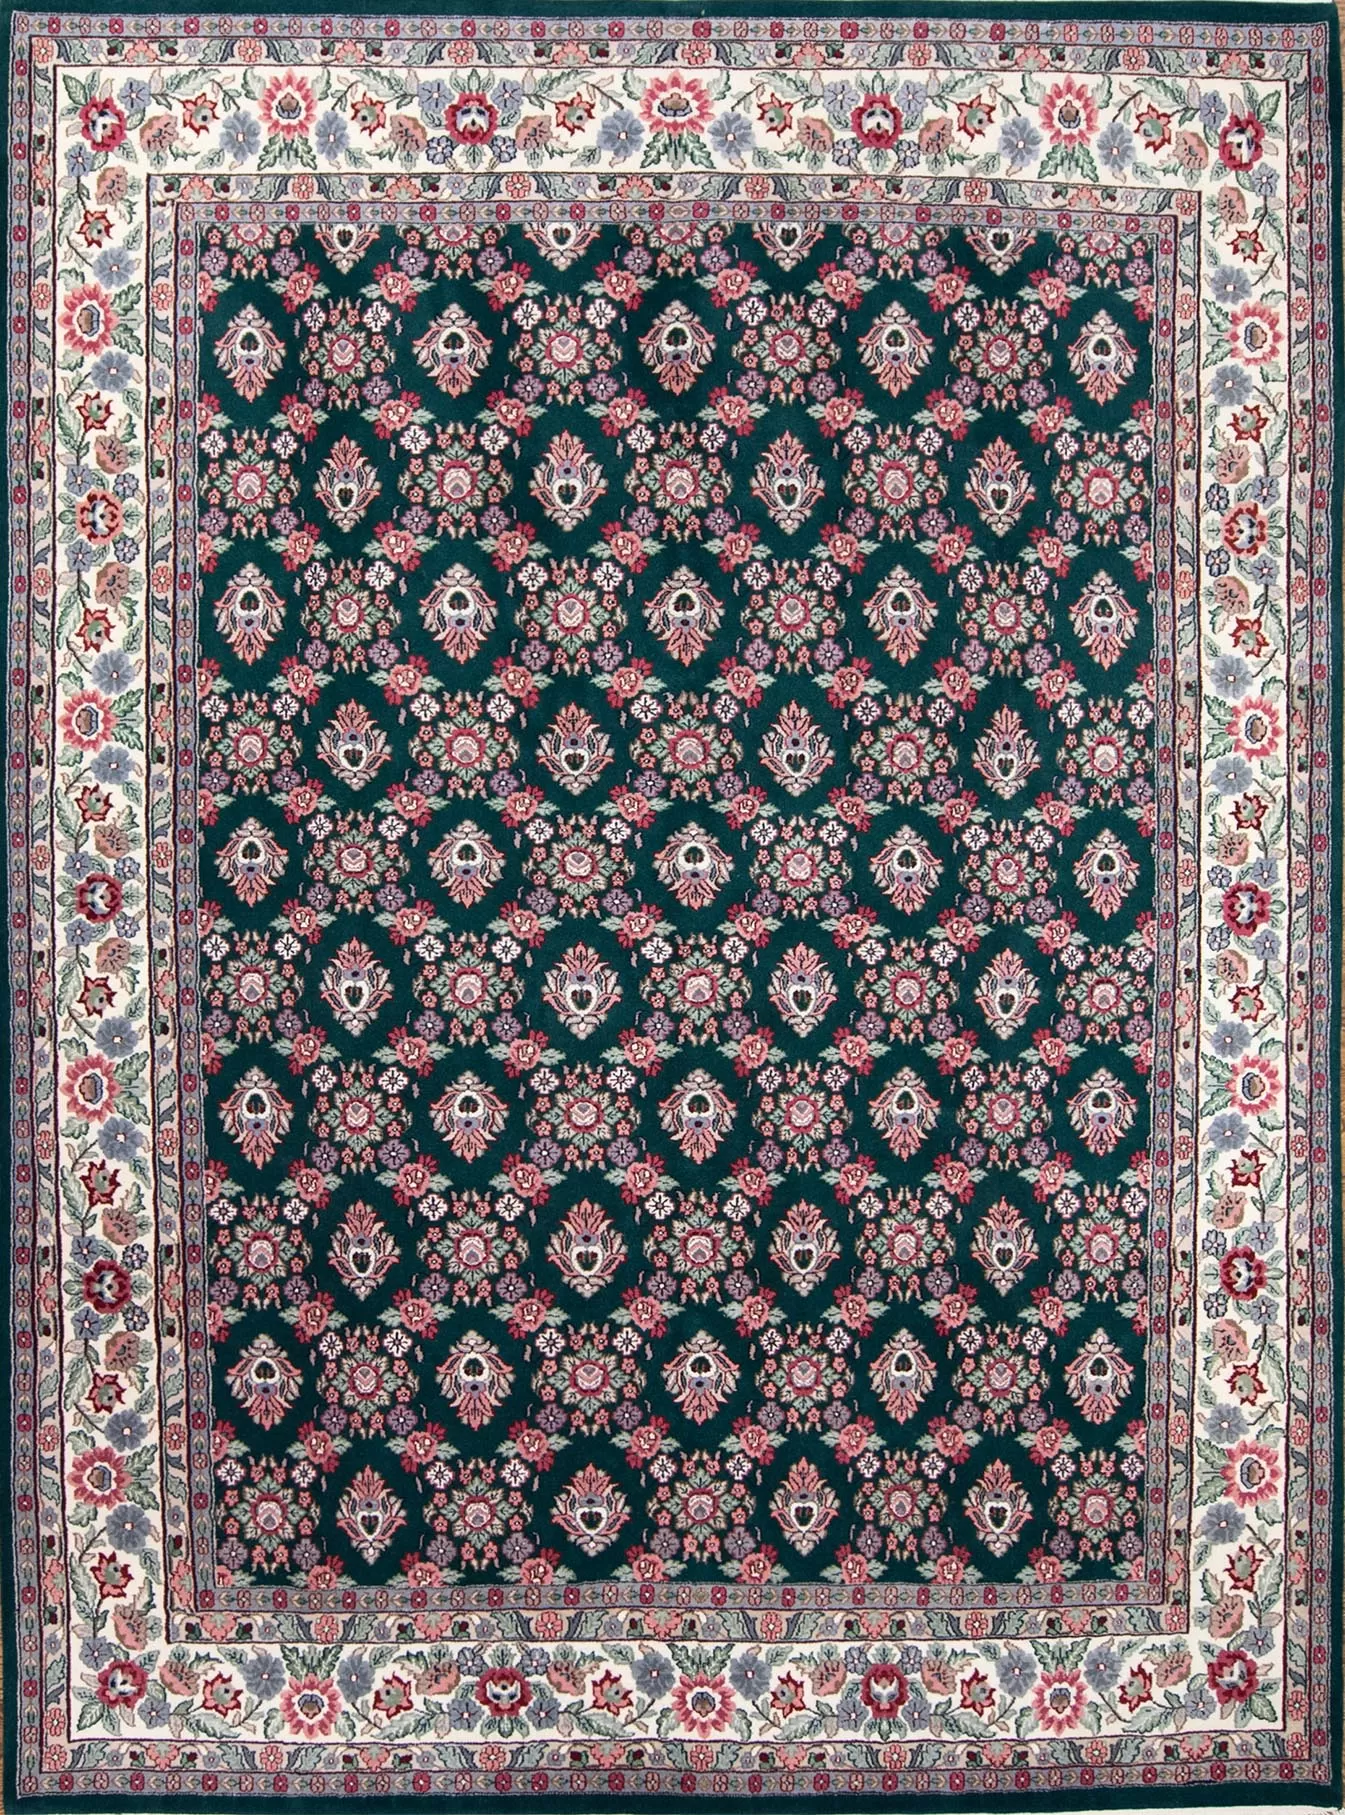 Handmade wool oriental rug, all-over floral design rug in green color. Size 9x12.